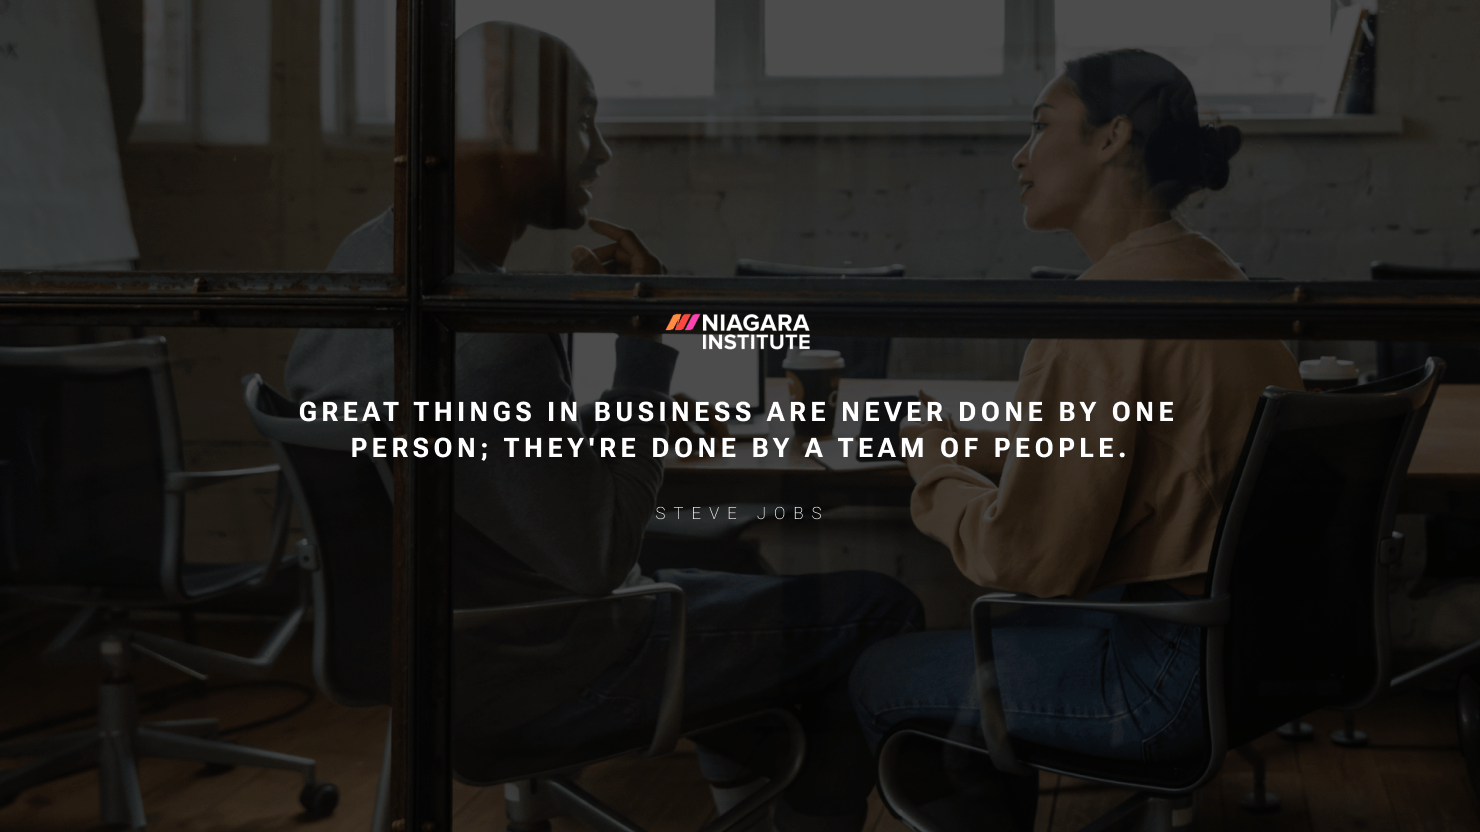 Great things in business are never done by one person; theyre done by a team of people